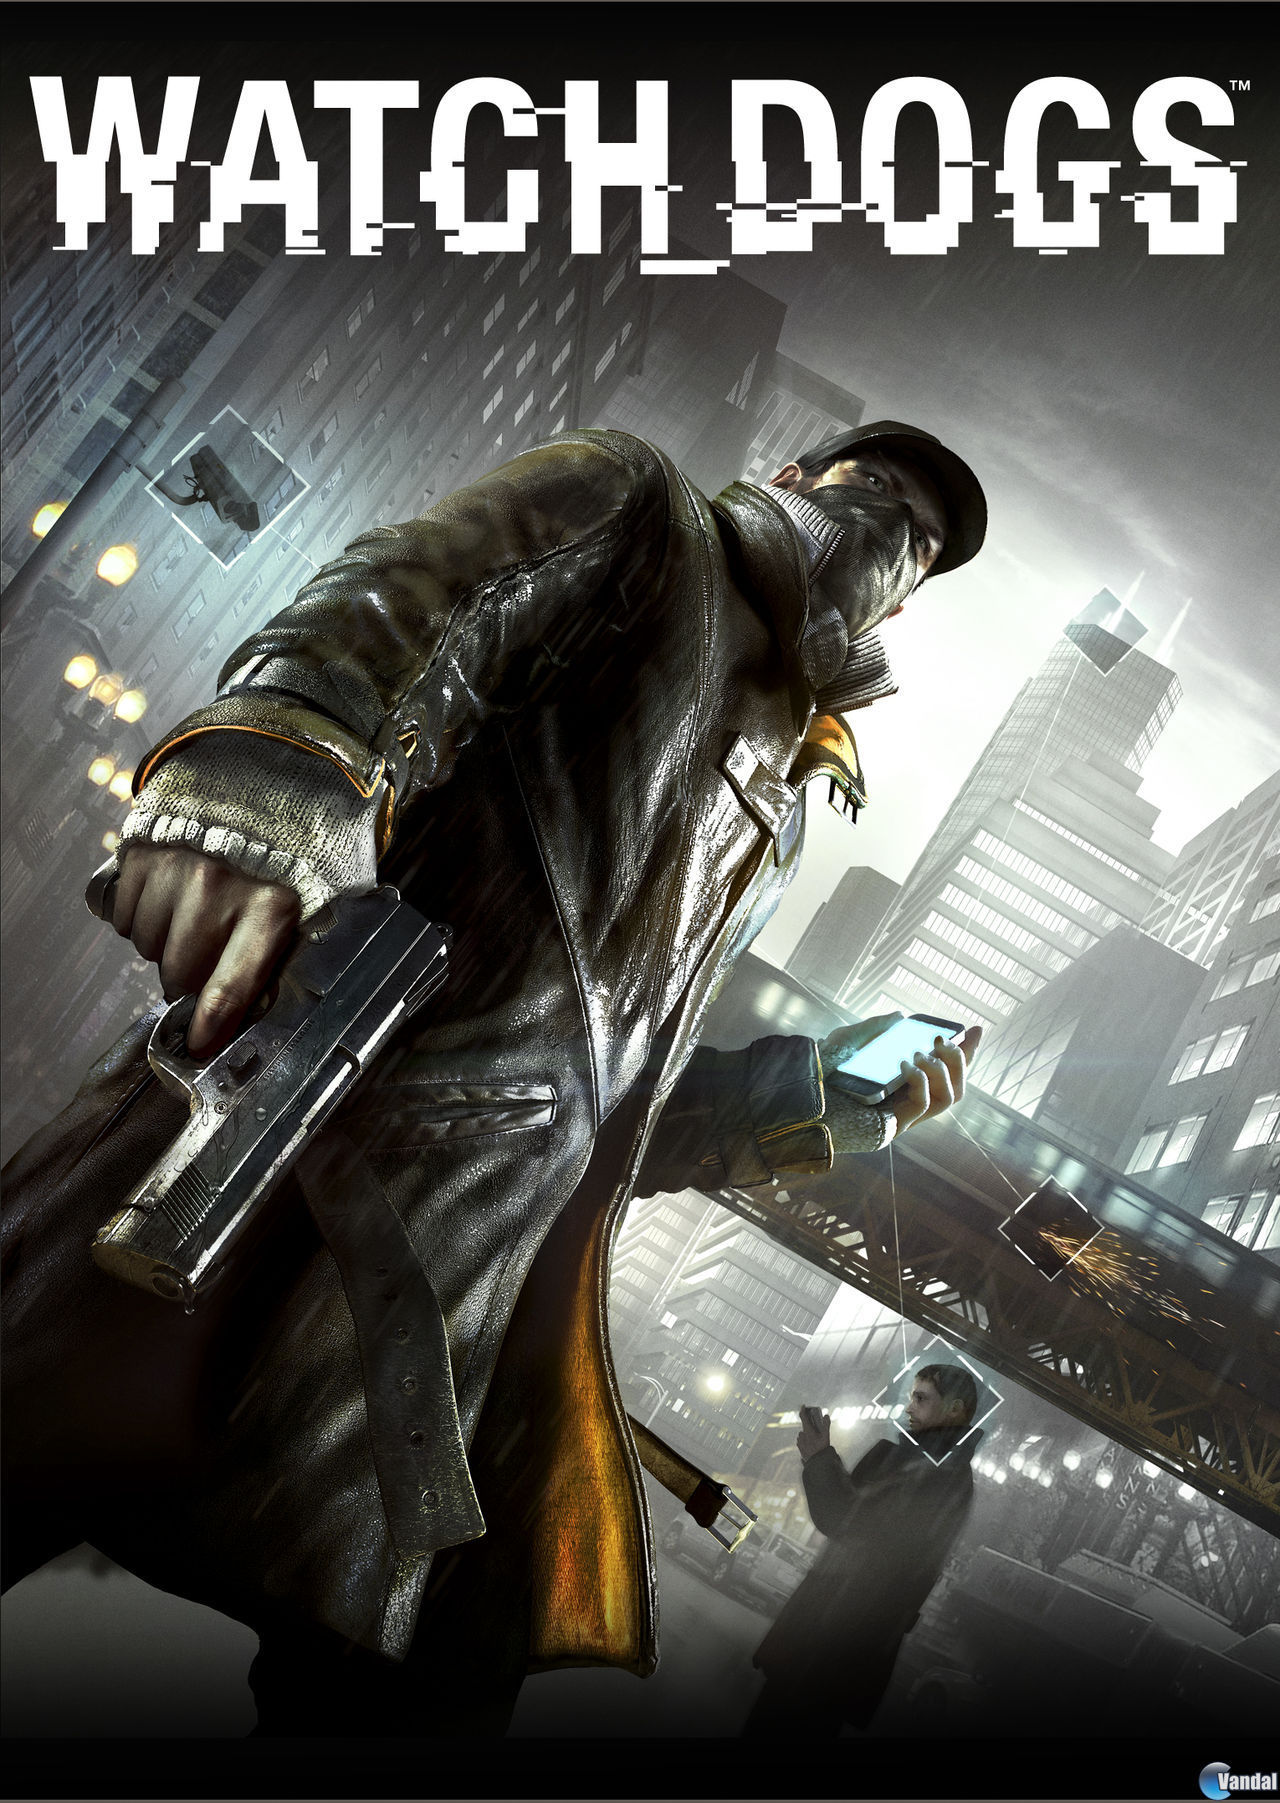 watch dogs, games 8K